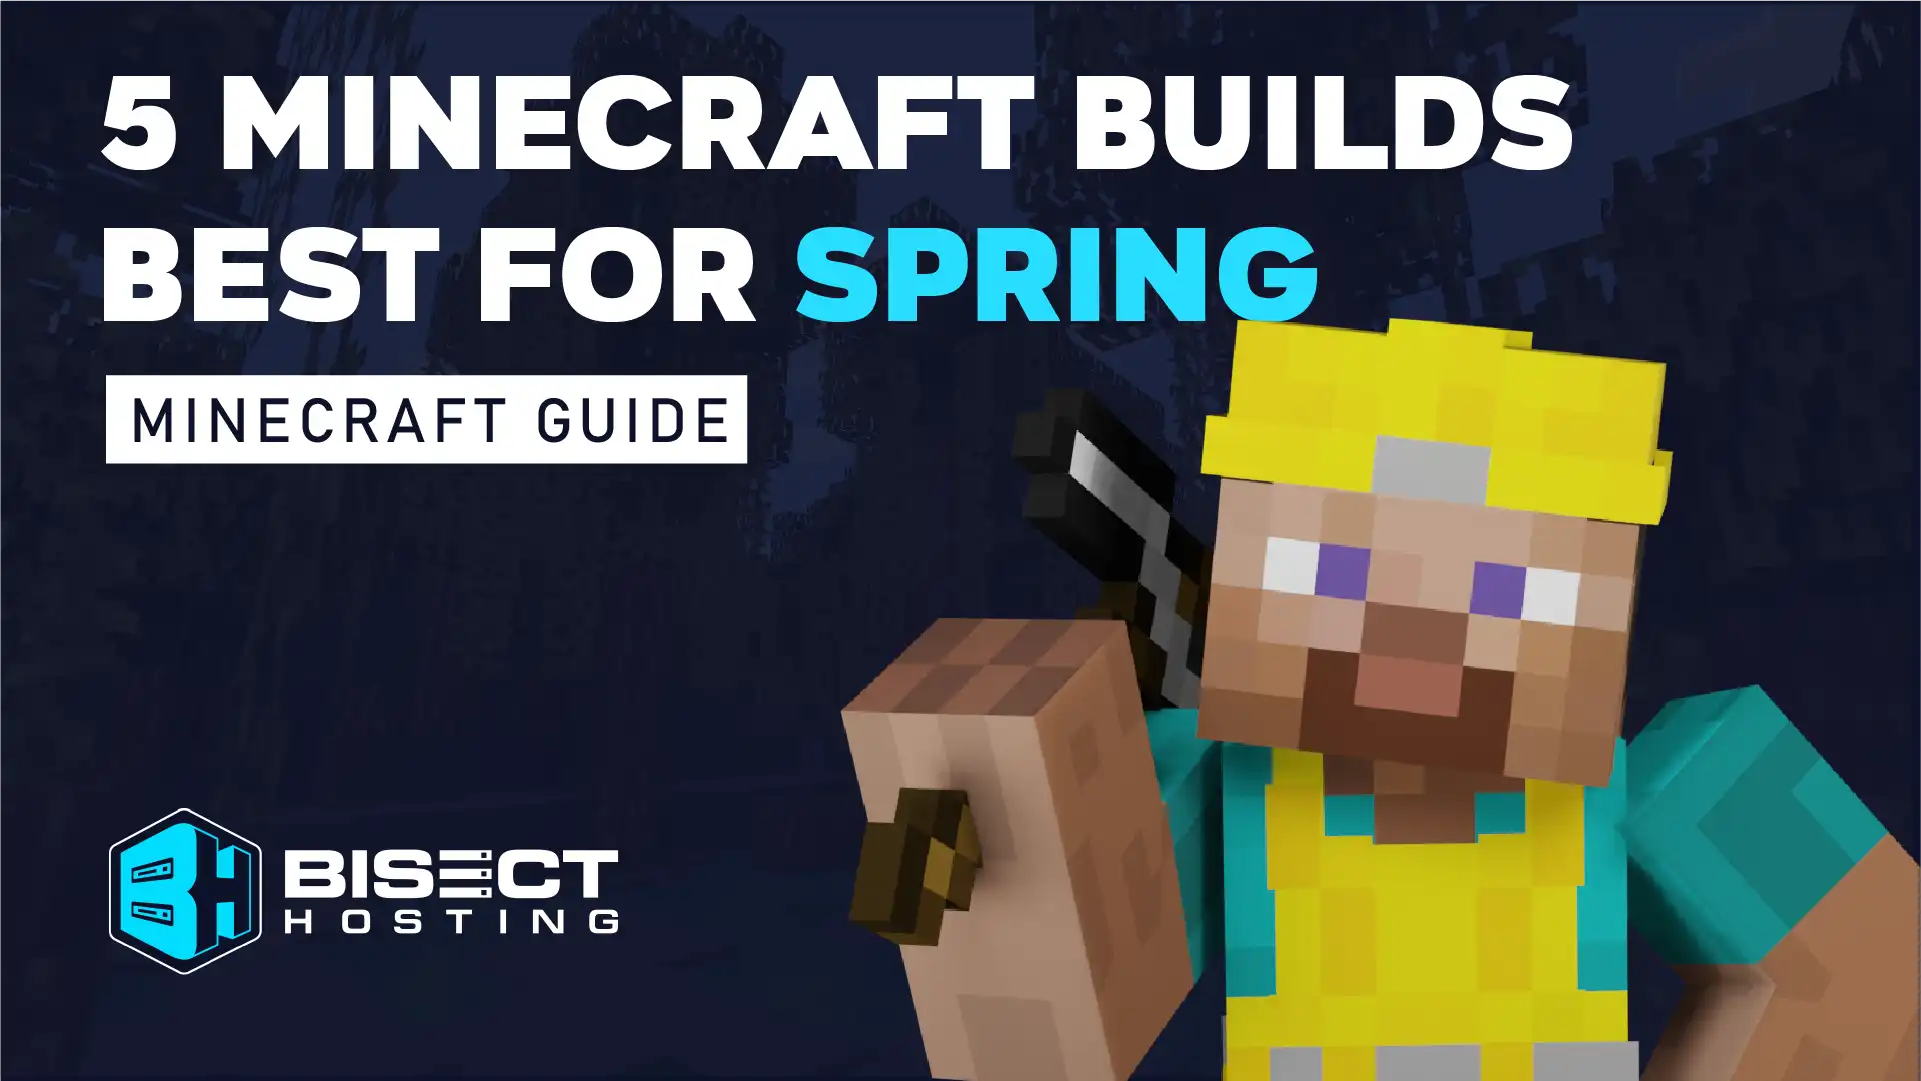 5 Minecraft Build Ideas Perfect for Spring